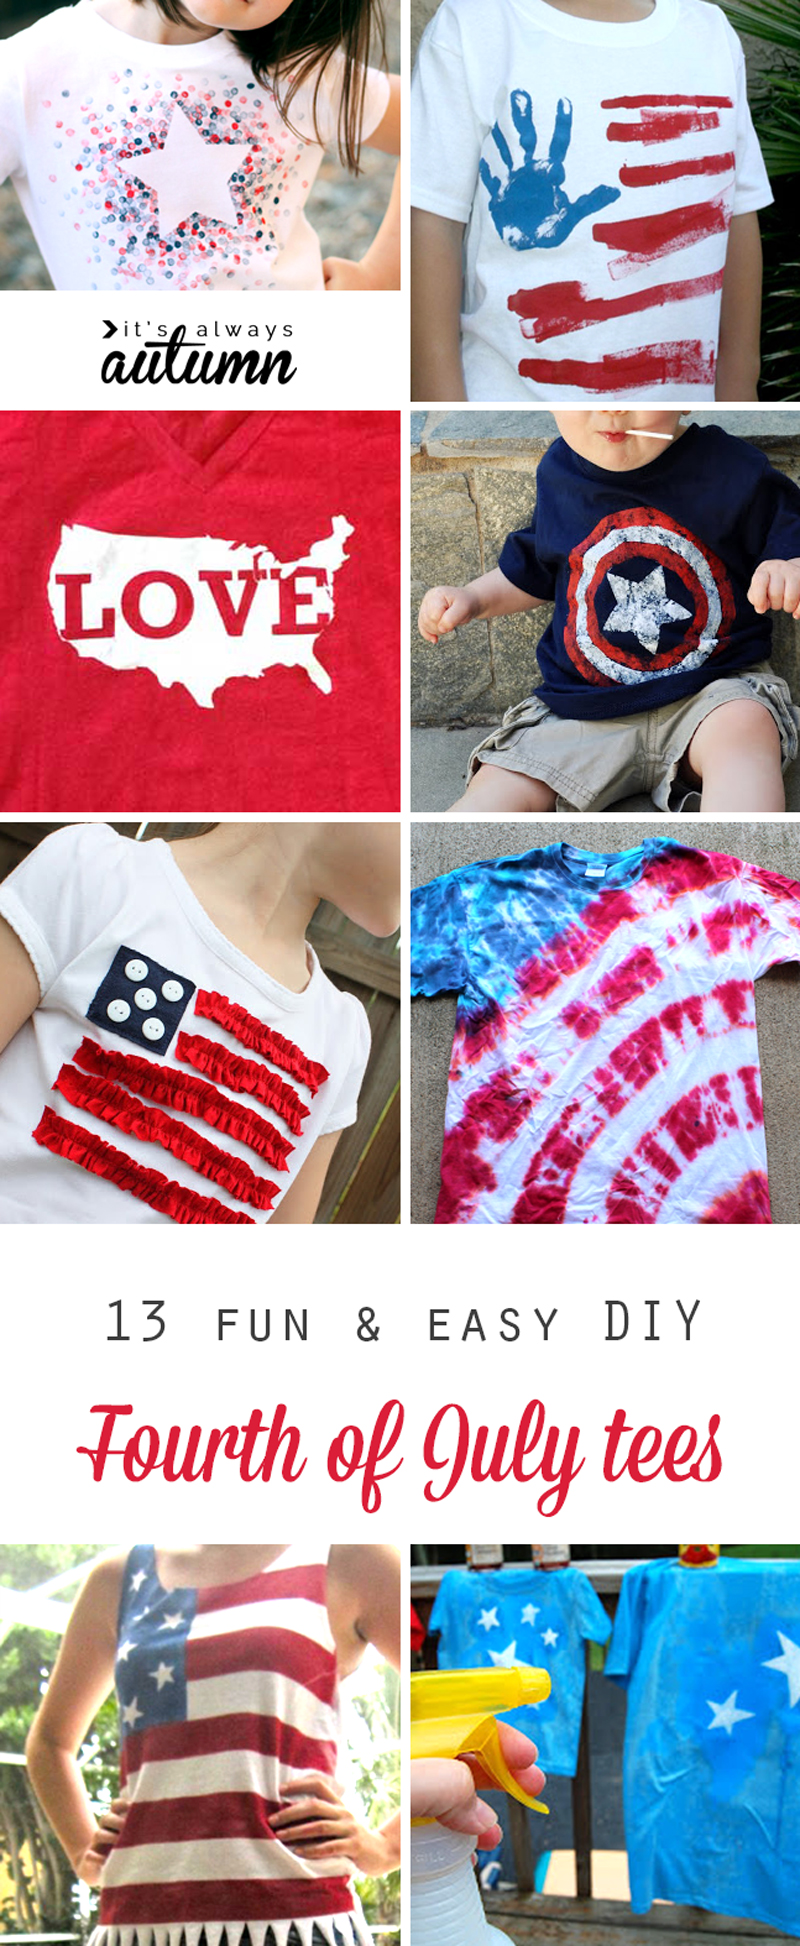 13 fun shirts to make for the Fourth of July - It's Always Autumn